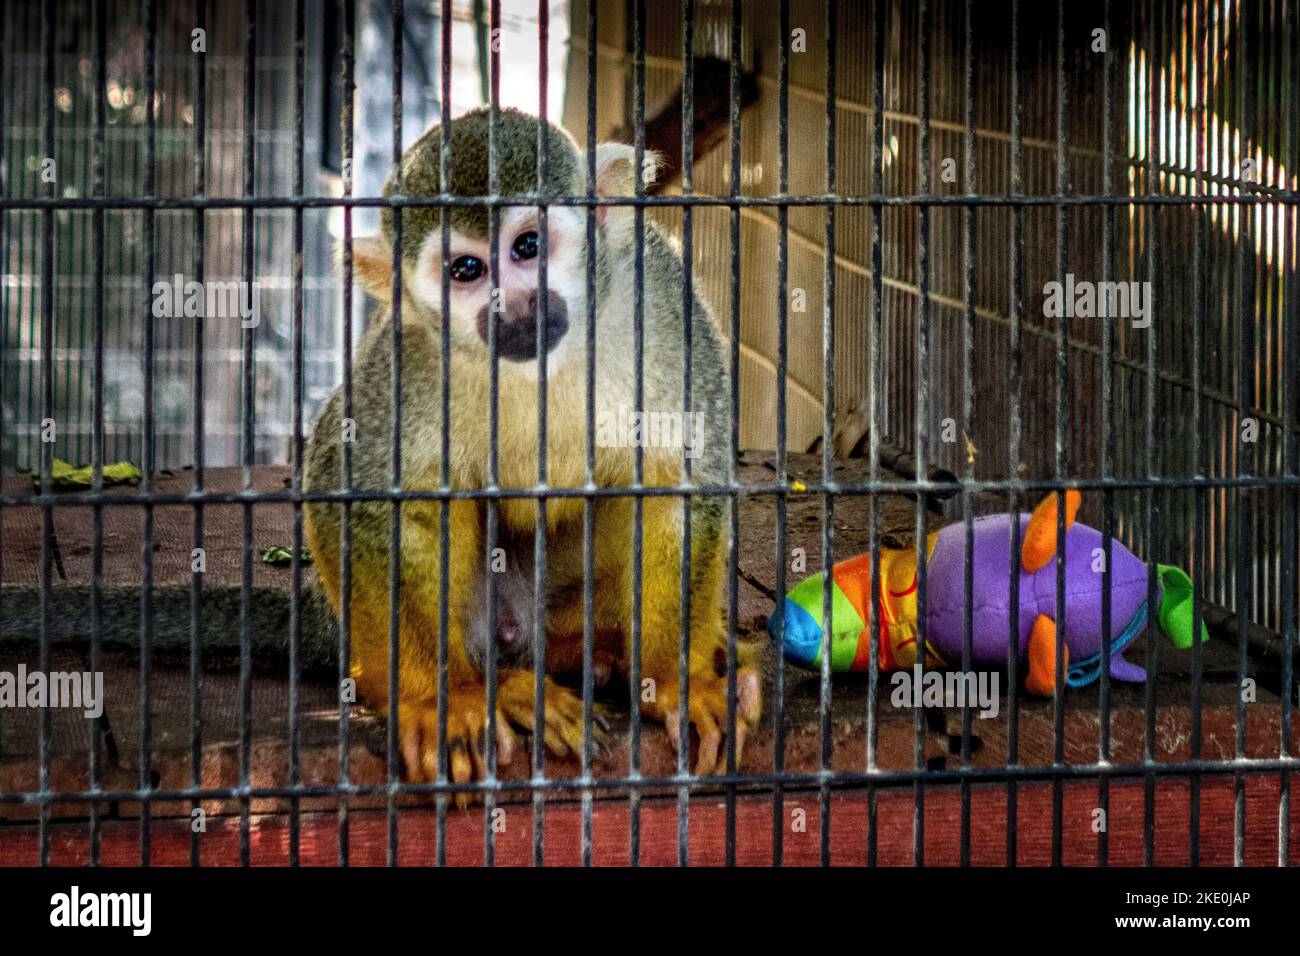 Sad Squirrel Monkey, Salmiri, behind bars in a cage after being rescued. Stock Photo